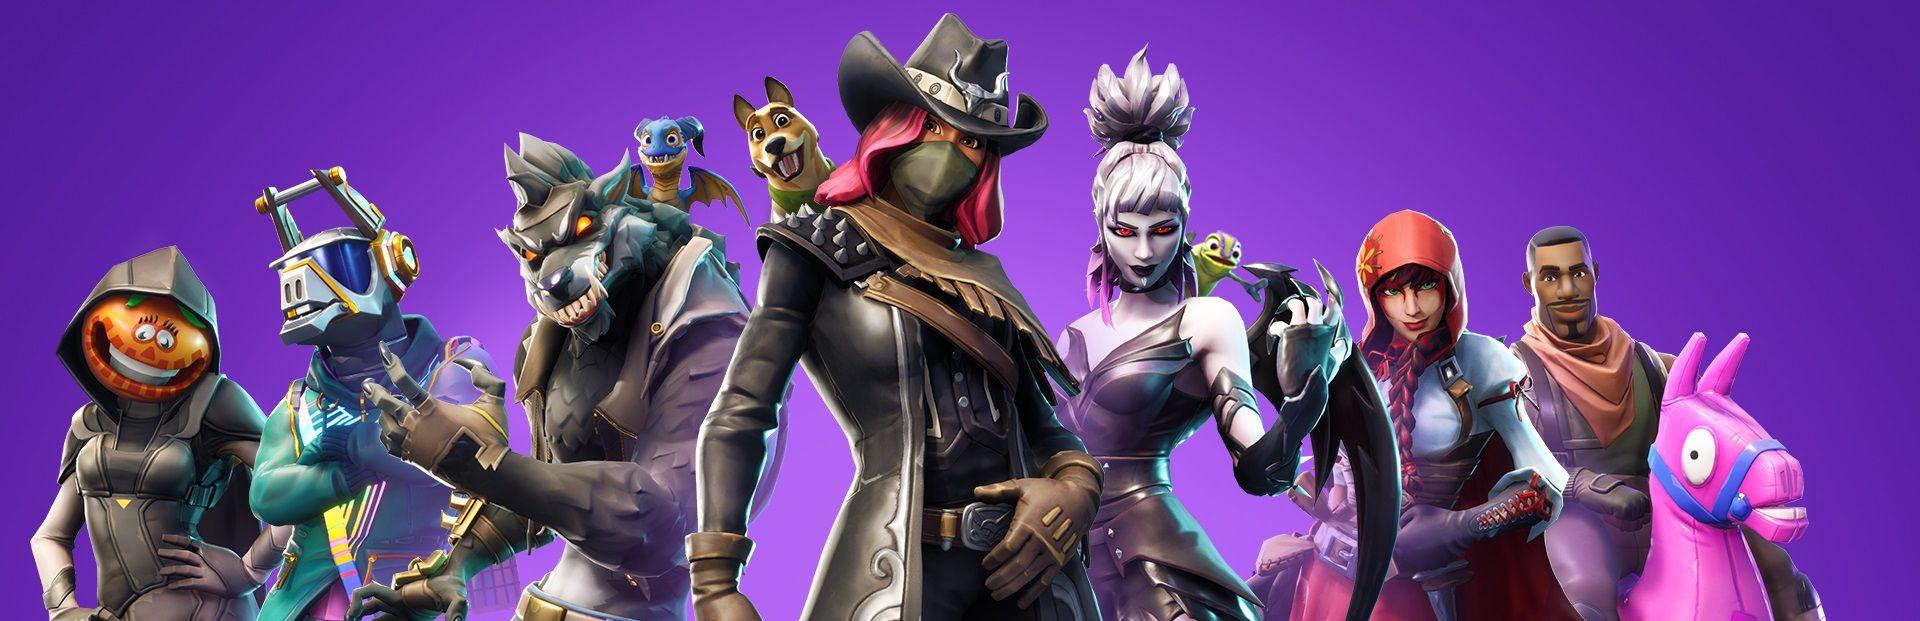 How to Upgrade the Dire and Calamity Skins in Fortnite. Tips